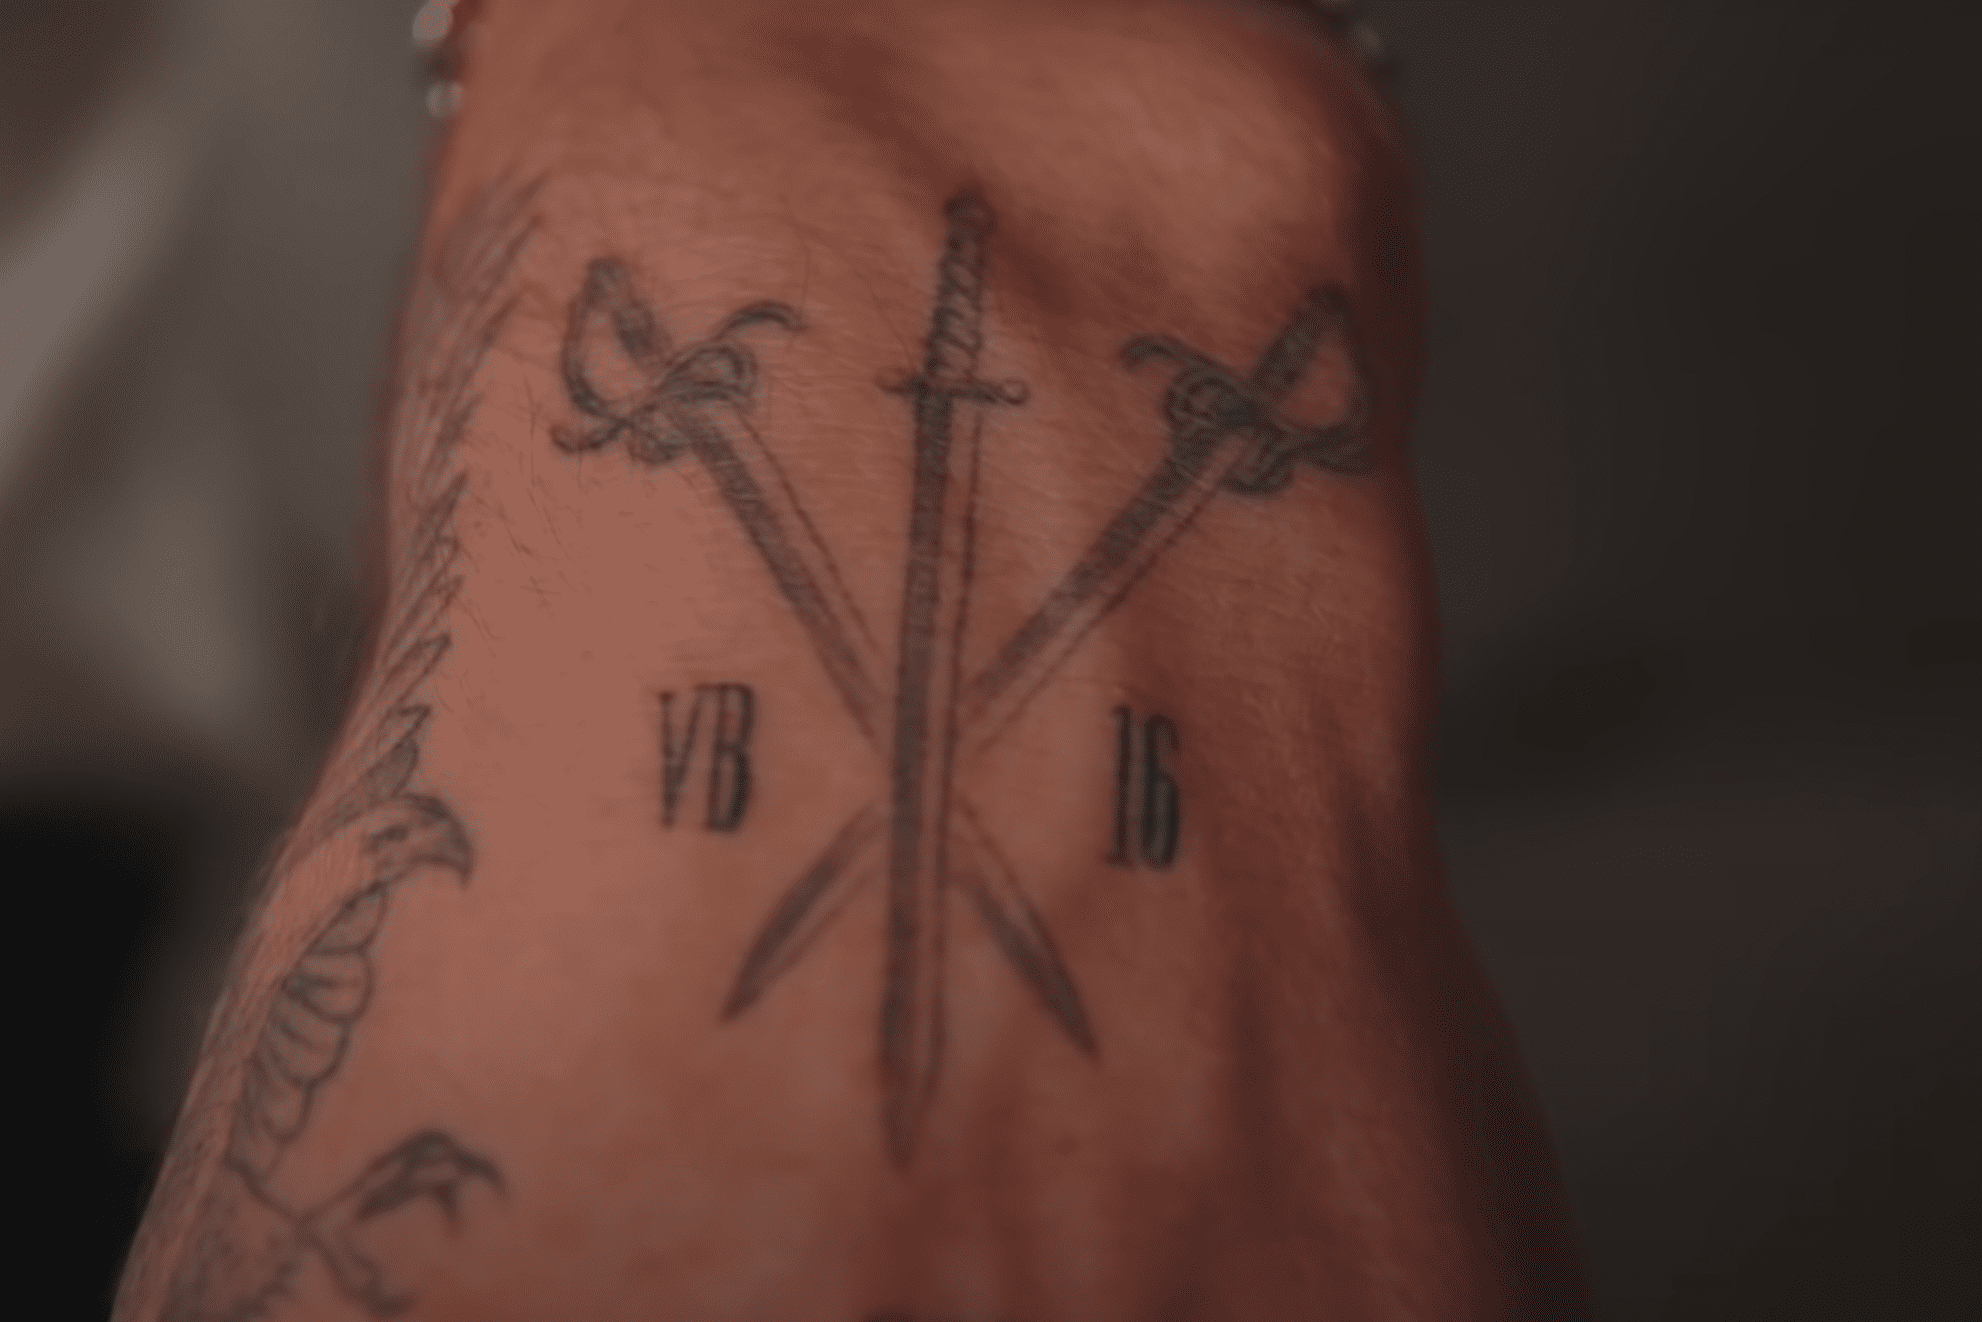 Vinnie Hacker's swords tattoo in honor of his family | Source: YouTube/ Inked